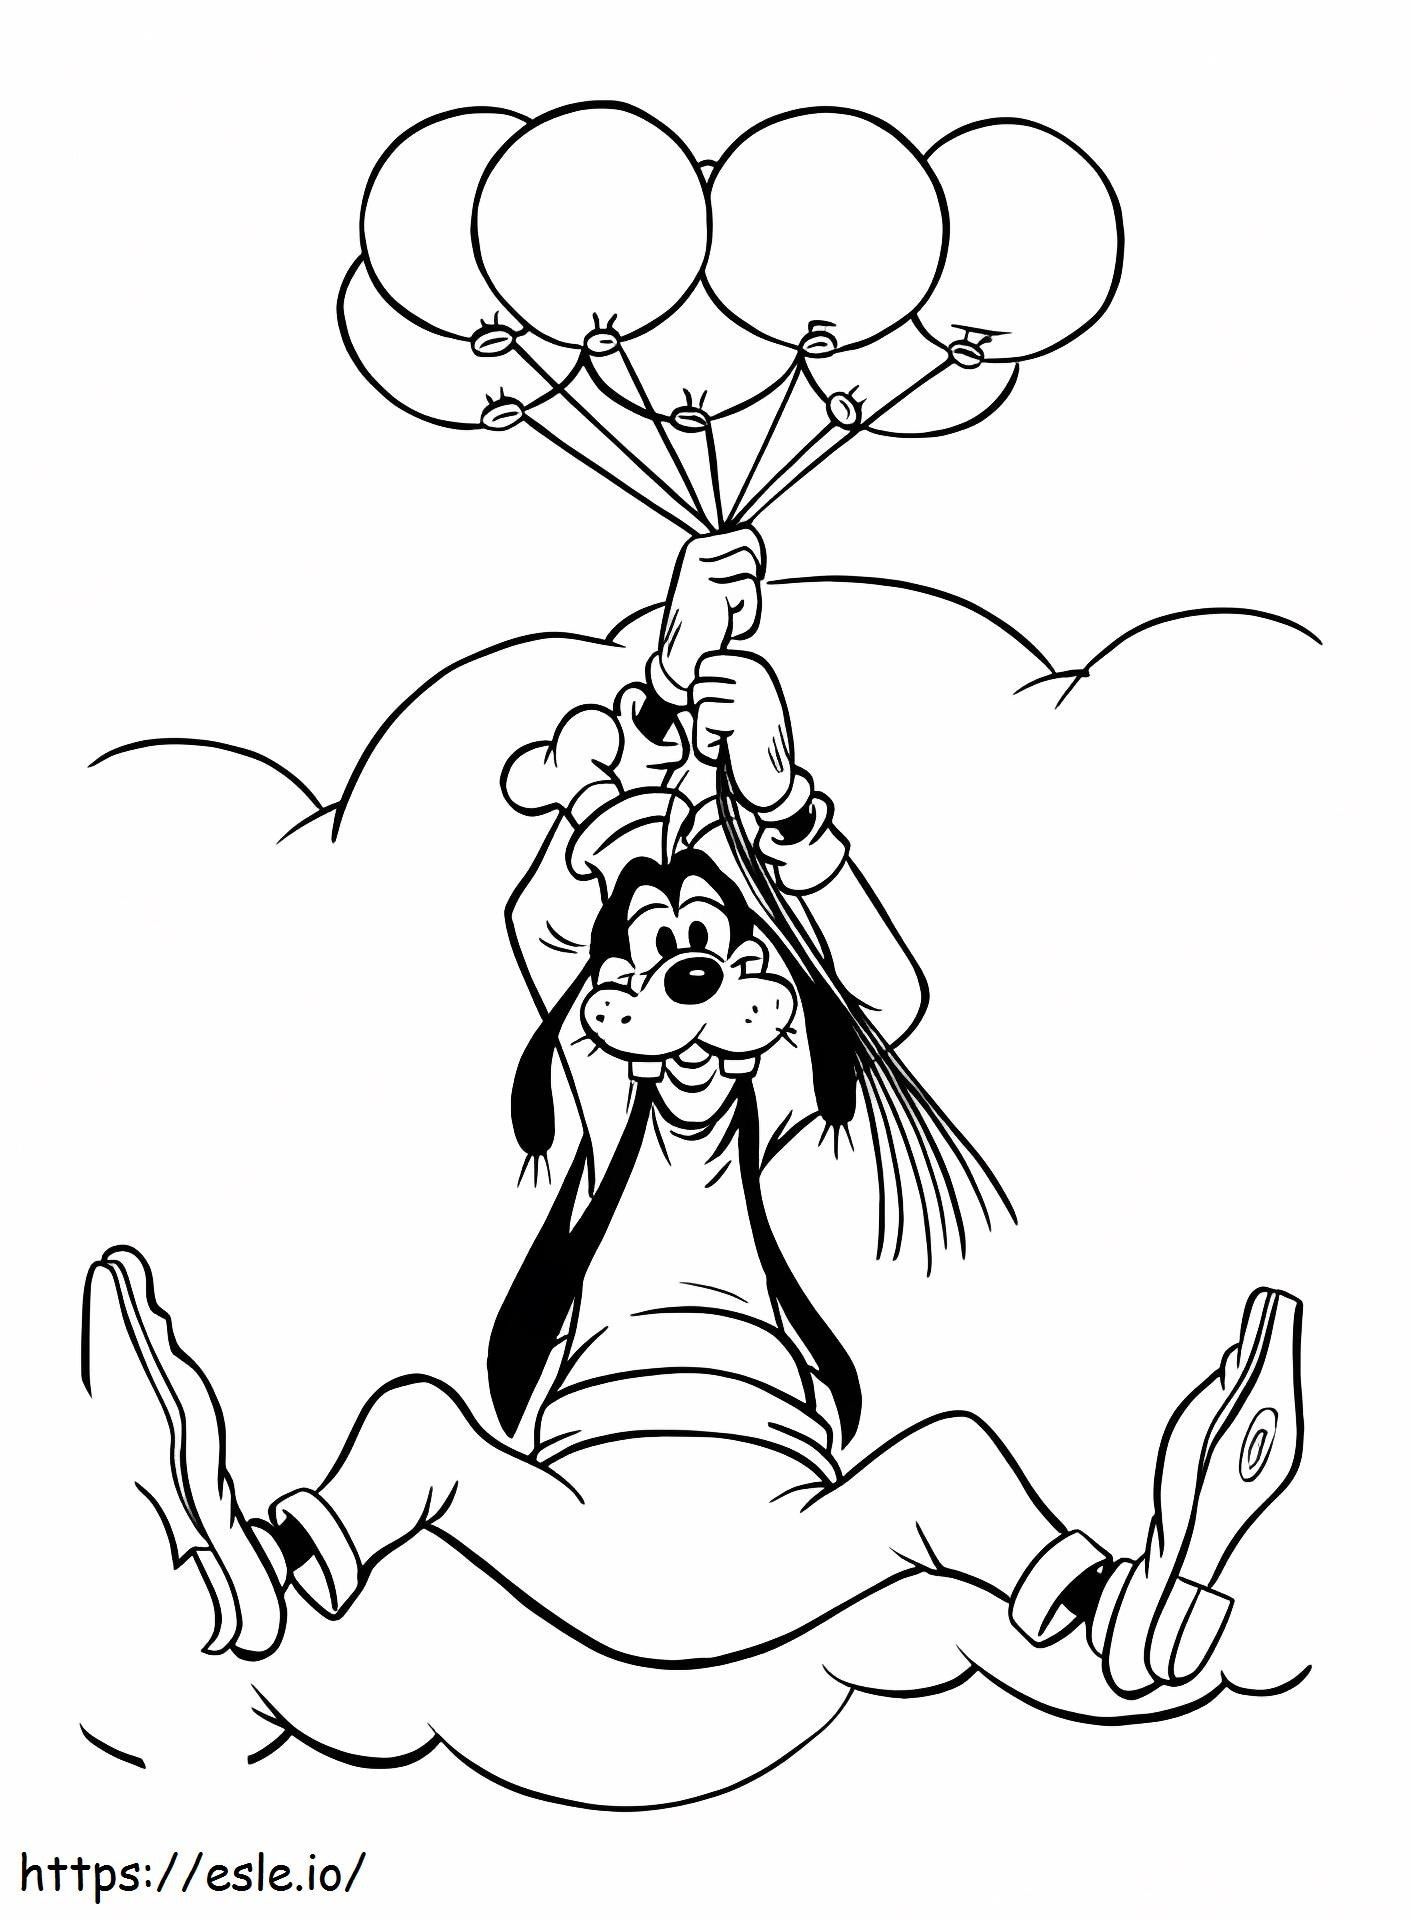 1532918892 Goofy Flying By Balloons A4 de colorat